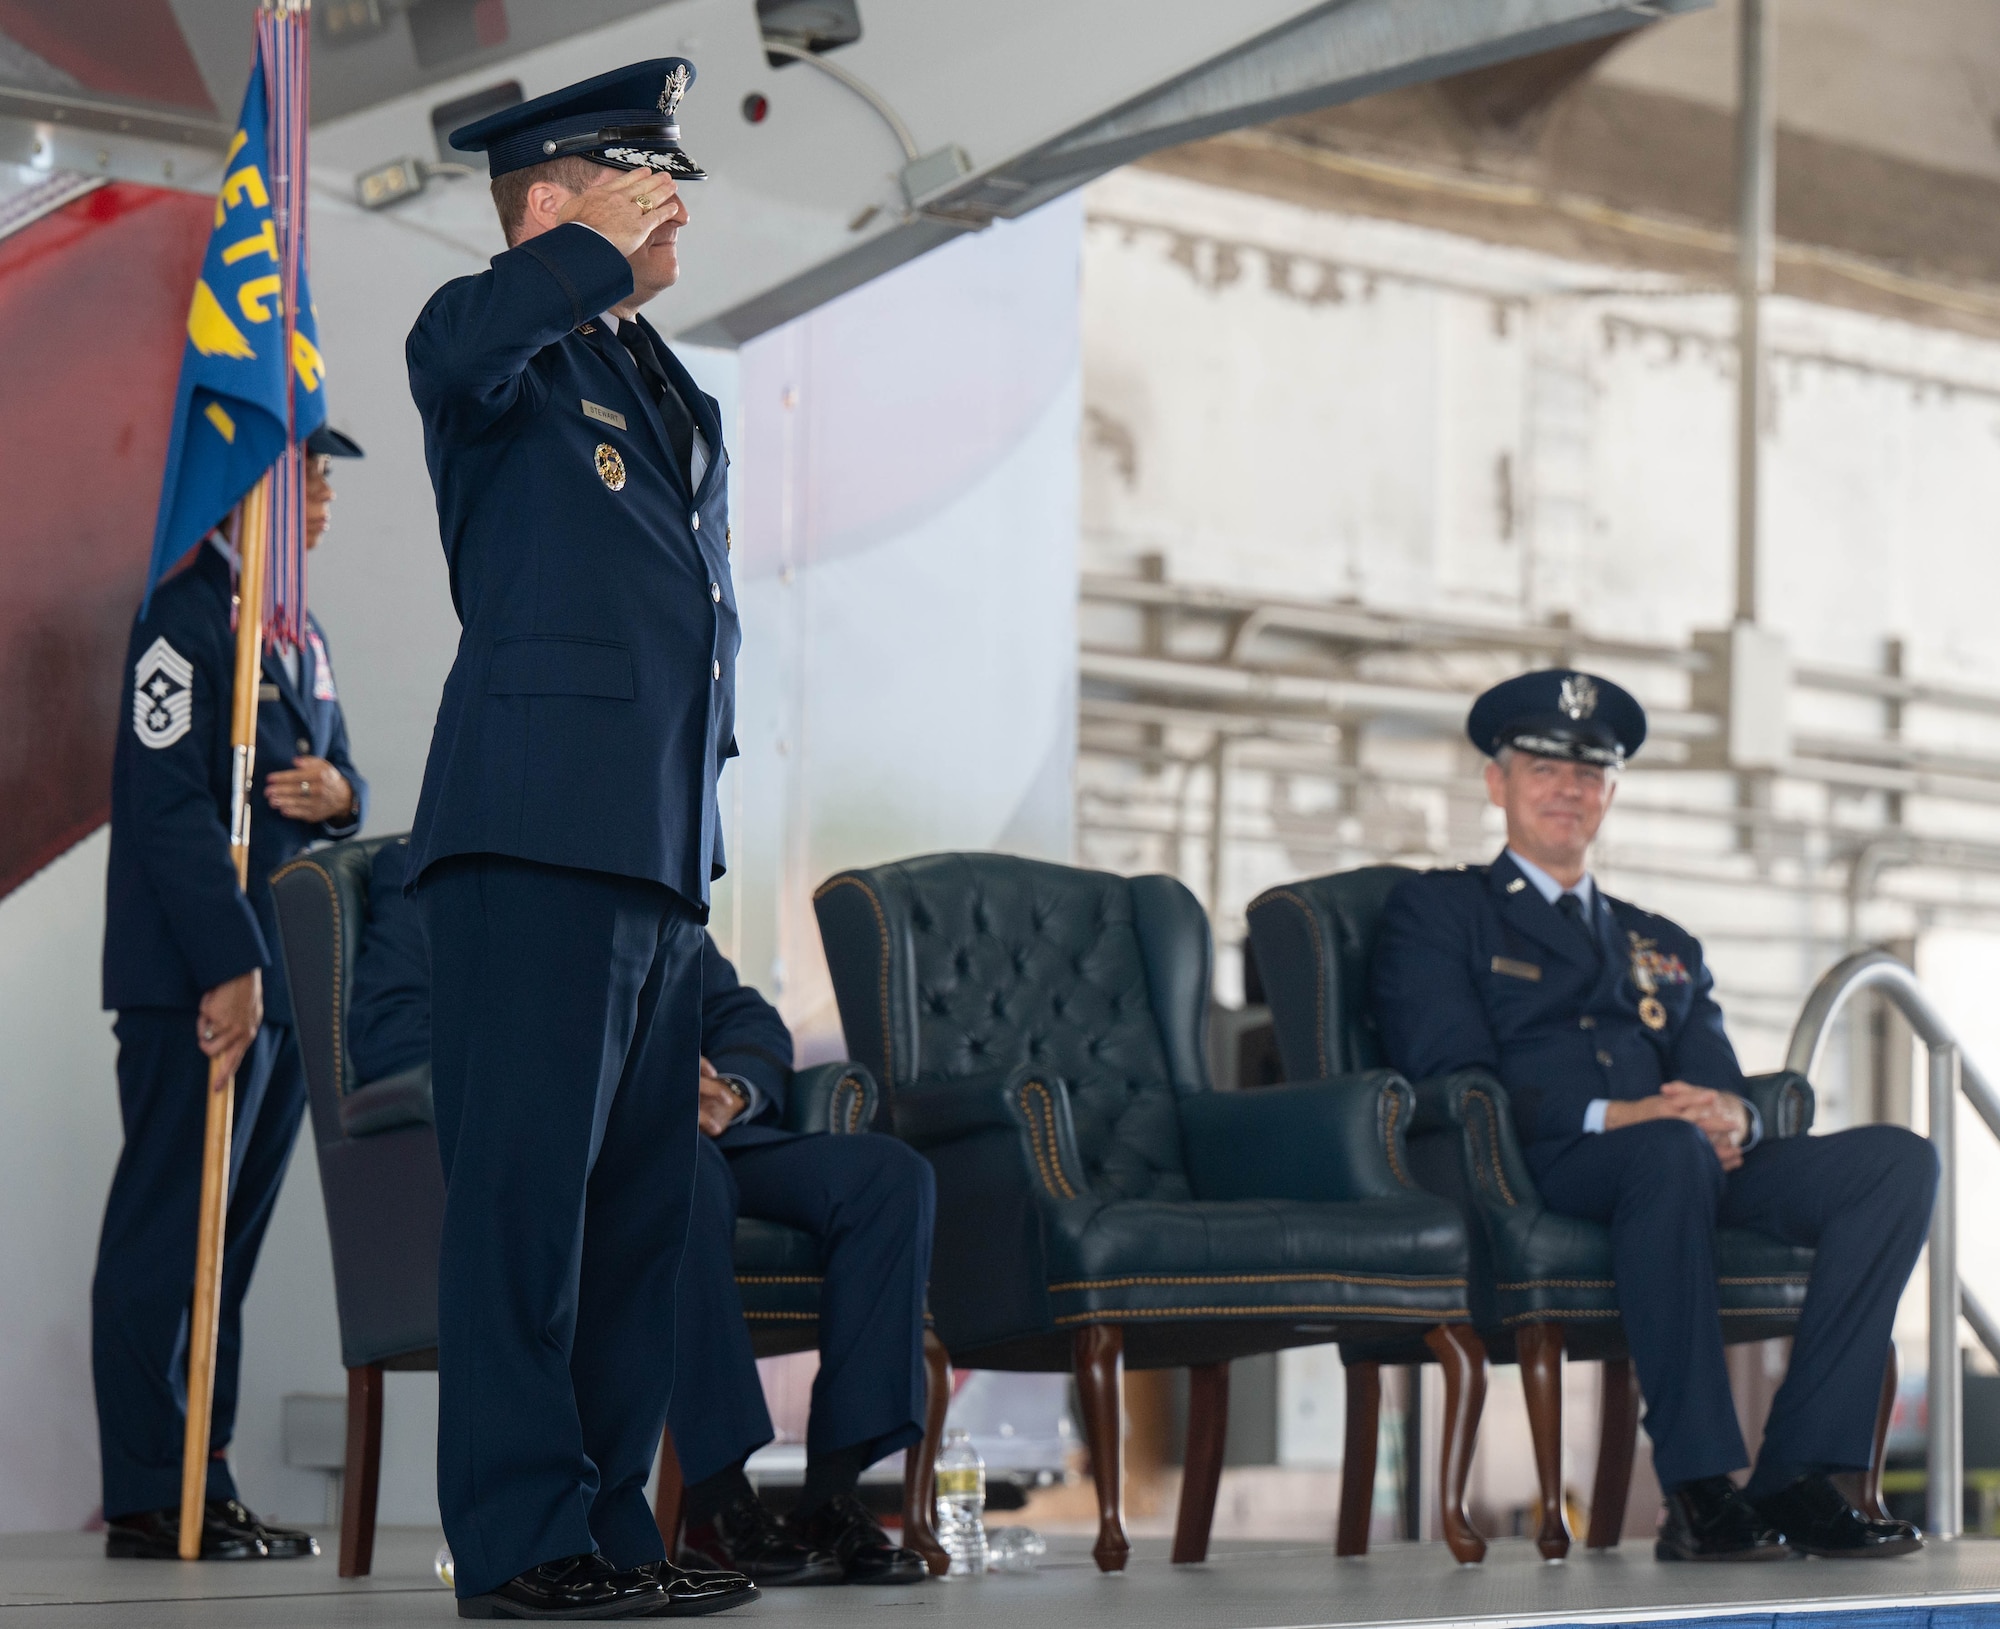 U.S. Air Force Maj. Gen. Phillip A. Stewart, 19th Air Force commander, renders his first salute
during the 19th Air Force change of command ceremony August 19, 2022, at Joint Base San
Antonio-Randolph, Texas. Stewart oversees top level instruction and flying operations manning,
contracts, logistics and maintenance trends. (U.S. Air Force photo by Senior Airman Tyler
McQuiston)